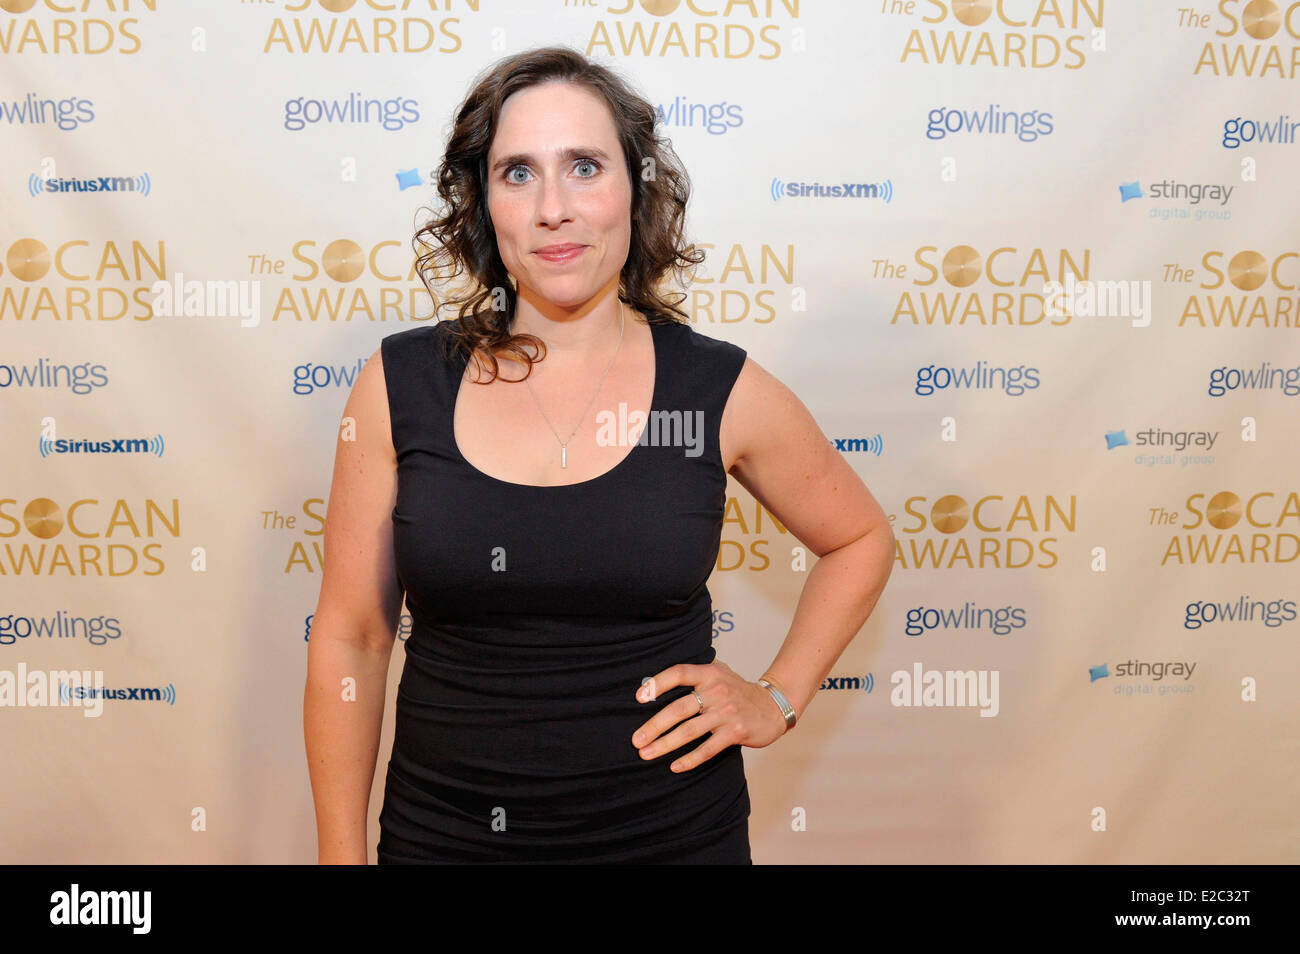 Rose Cousins poses for photo at the 25th SOCAN Awards (Society of Composers, Authors and Music Publishers of Canada). Stock Photo